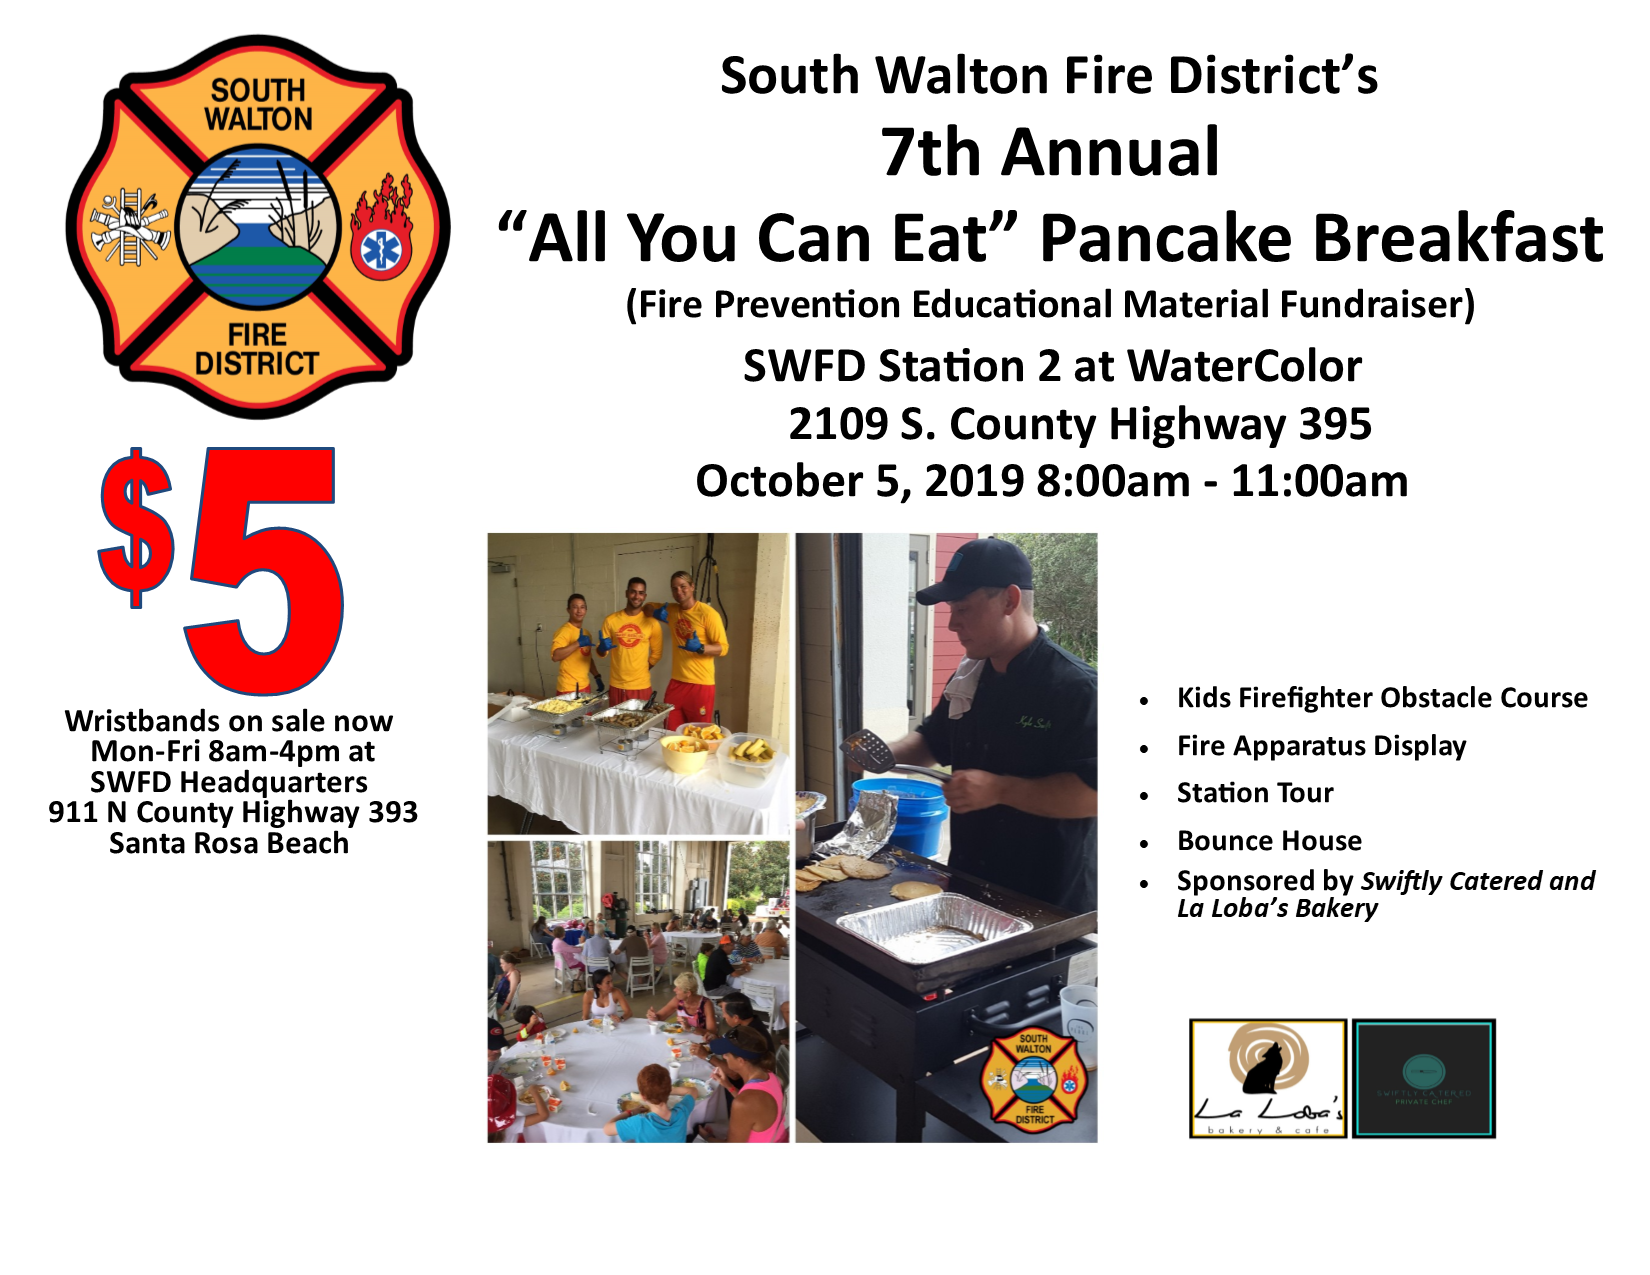 7th Annual All You Can Eat SWFD Fire Prevention Pancake Breakfast